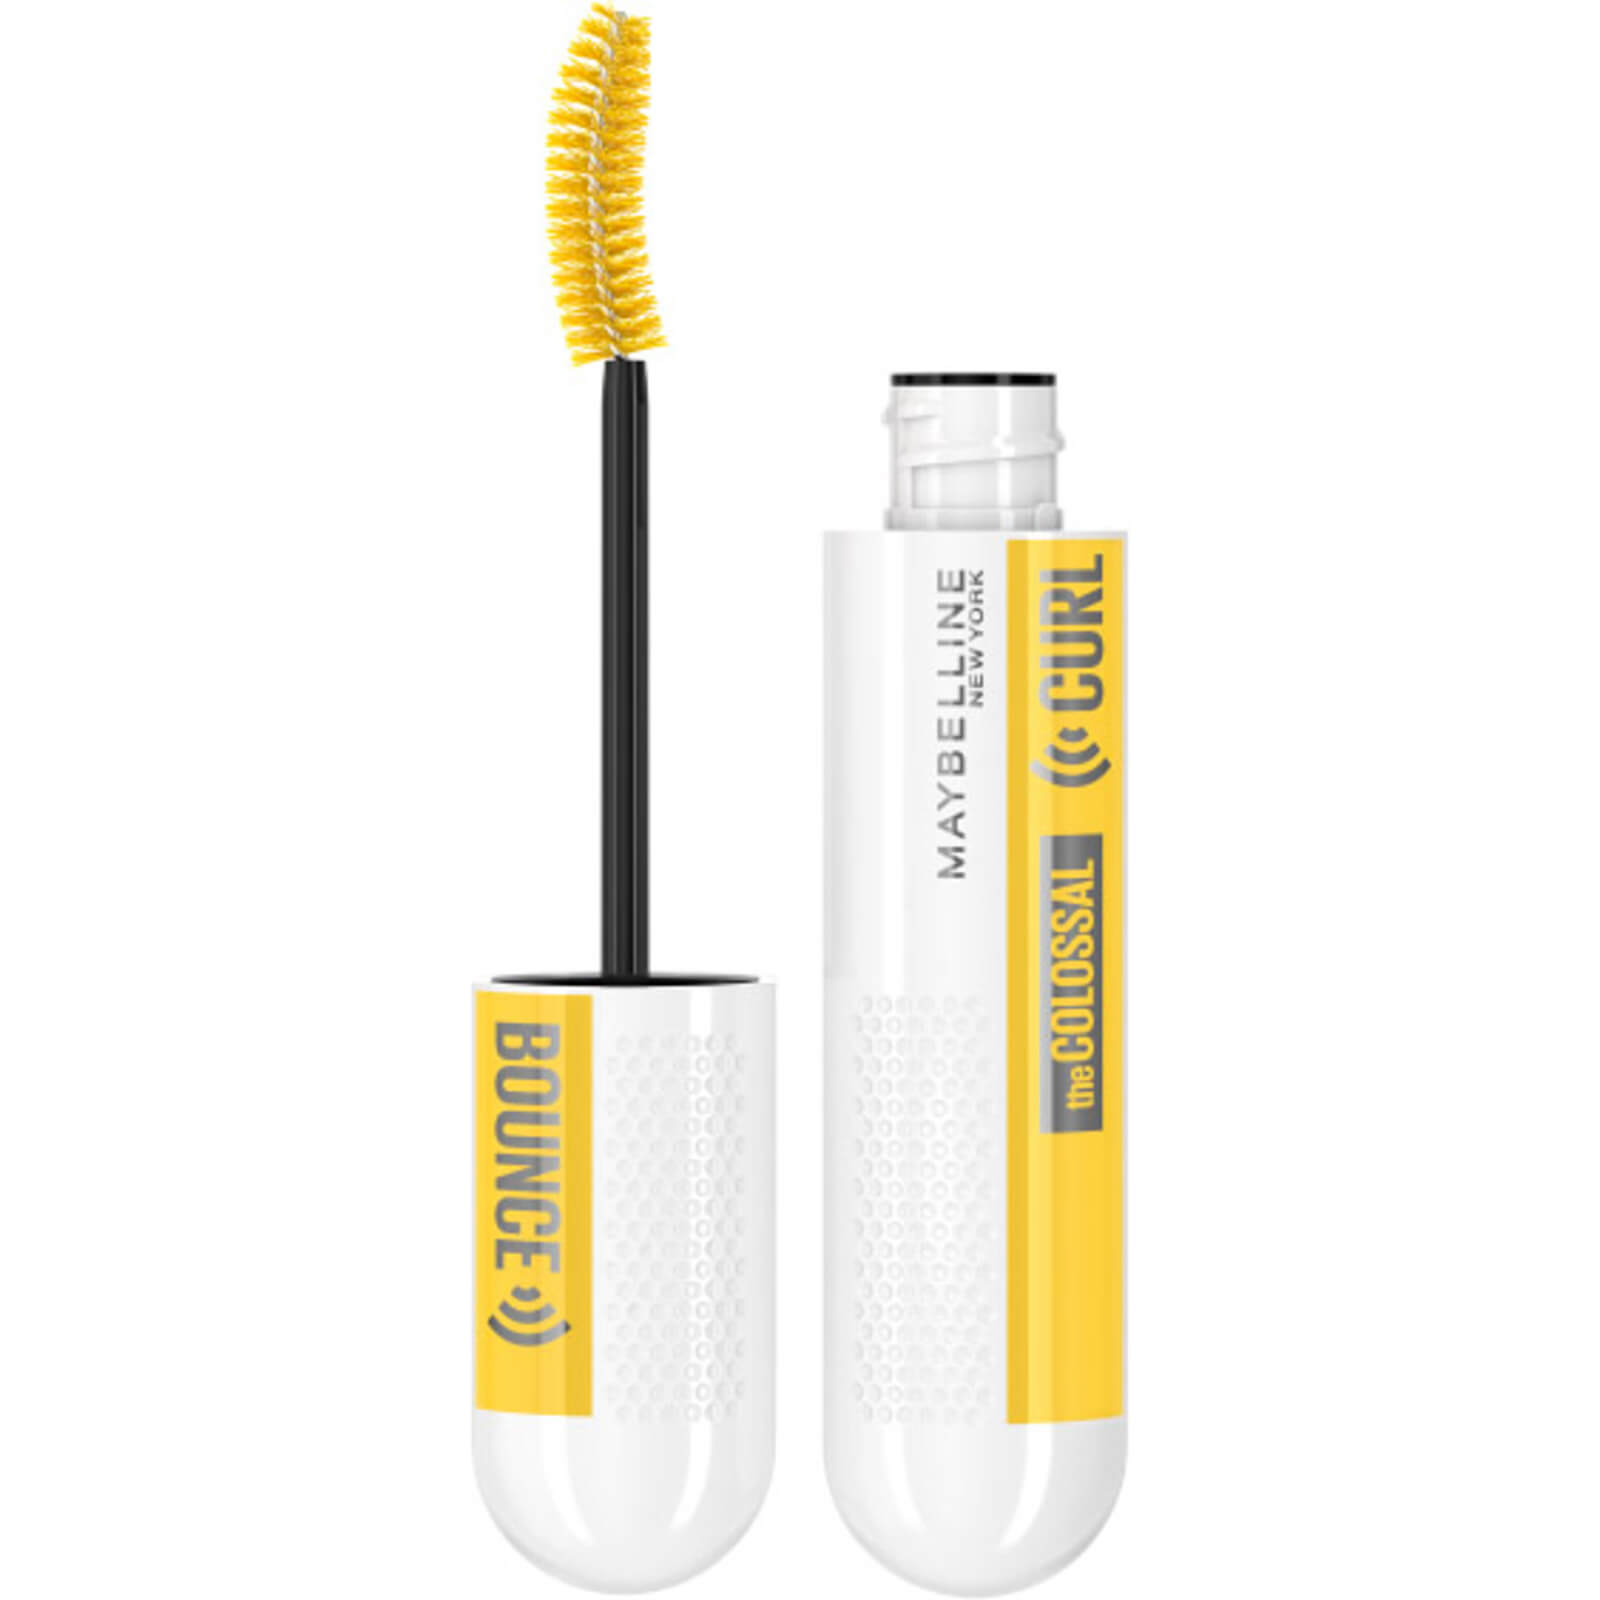 Mascara Colossal Curl Bounce Maybelline - Très noir 61 g